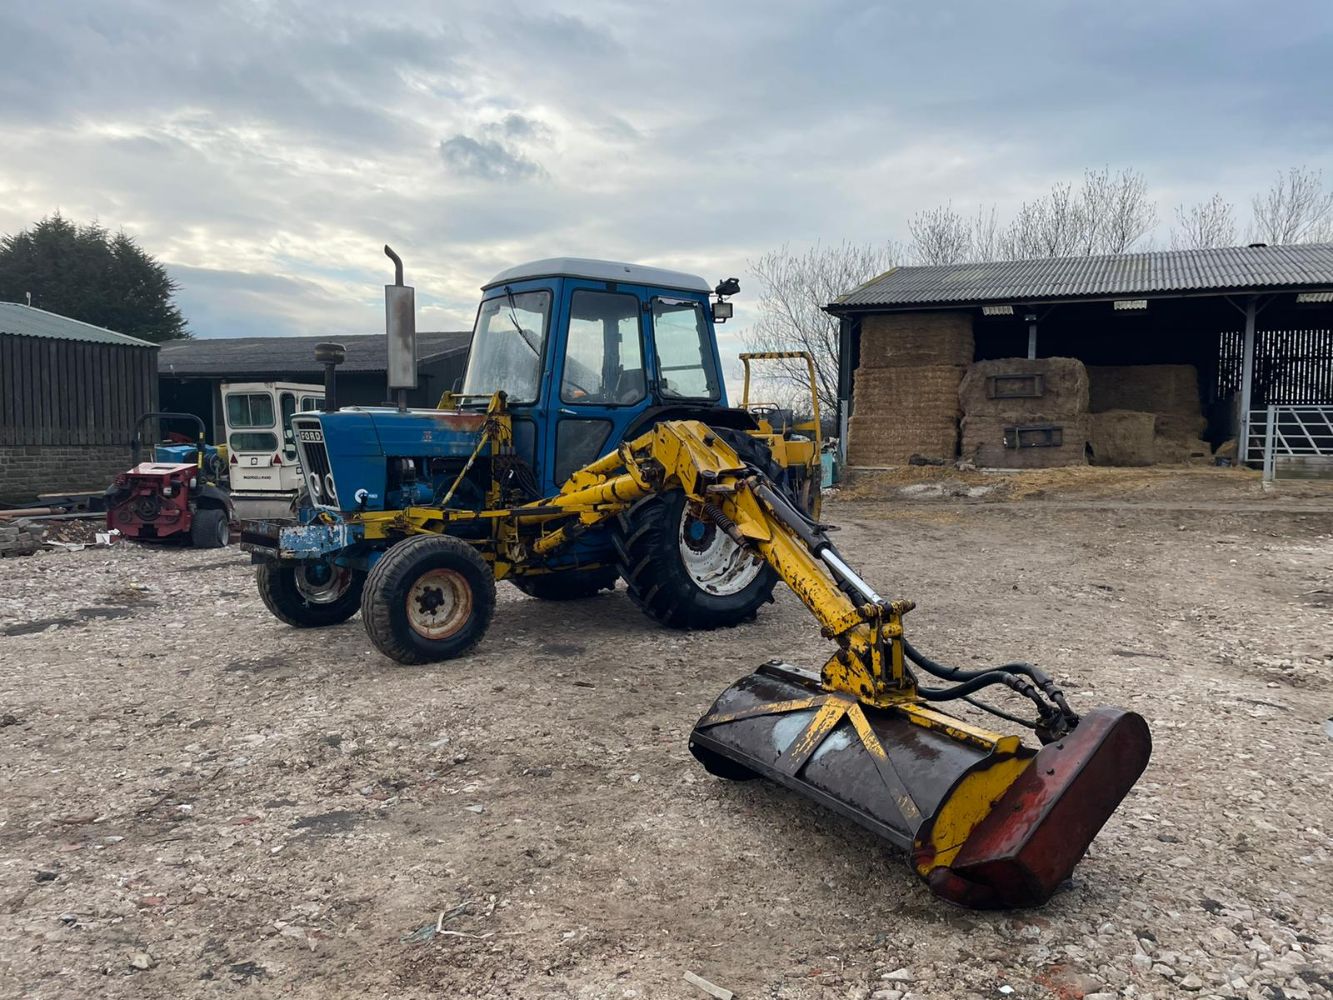 New Holland TC40D Tractor With Loader And Bale Spike, MITSUBISHI FORKLIFTS, PORTALOO TOILET BLOCKS, ELECTRIC POWER TOWER, ALL ENDS 8PM TUESDAY!